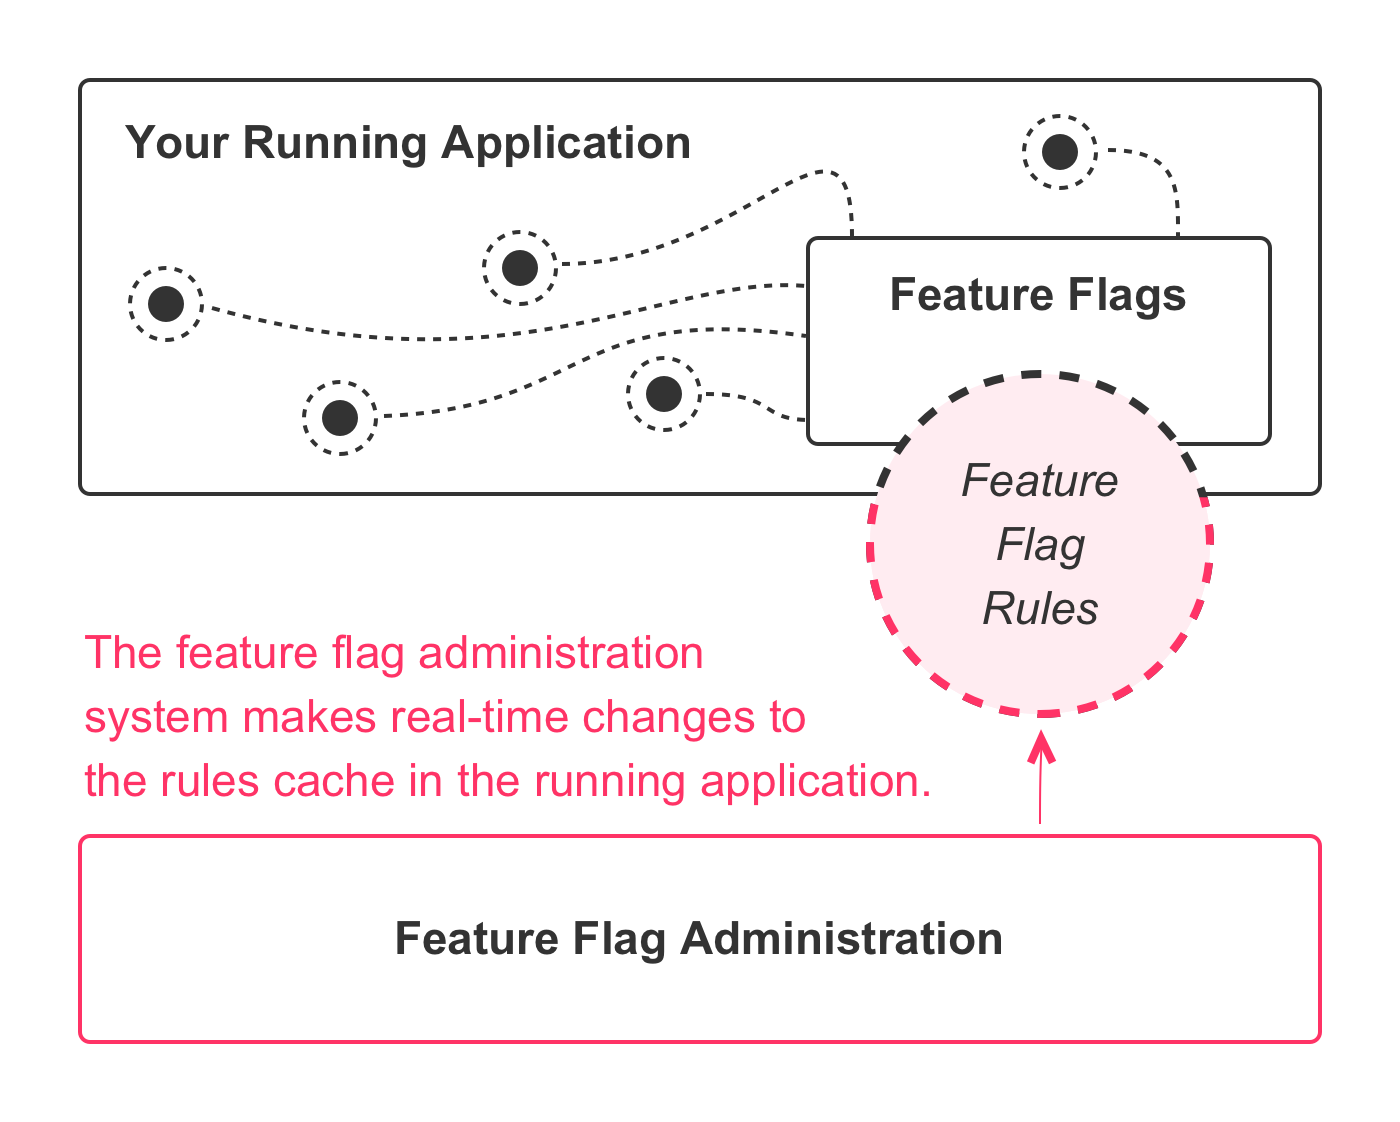 An application architecture diagram showing two systems: a running application and a feature flag administration, with a link between the two systems.